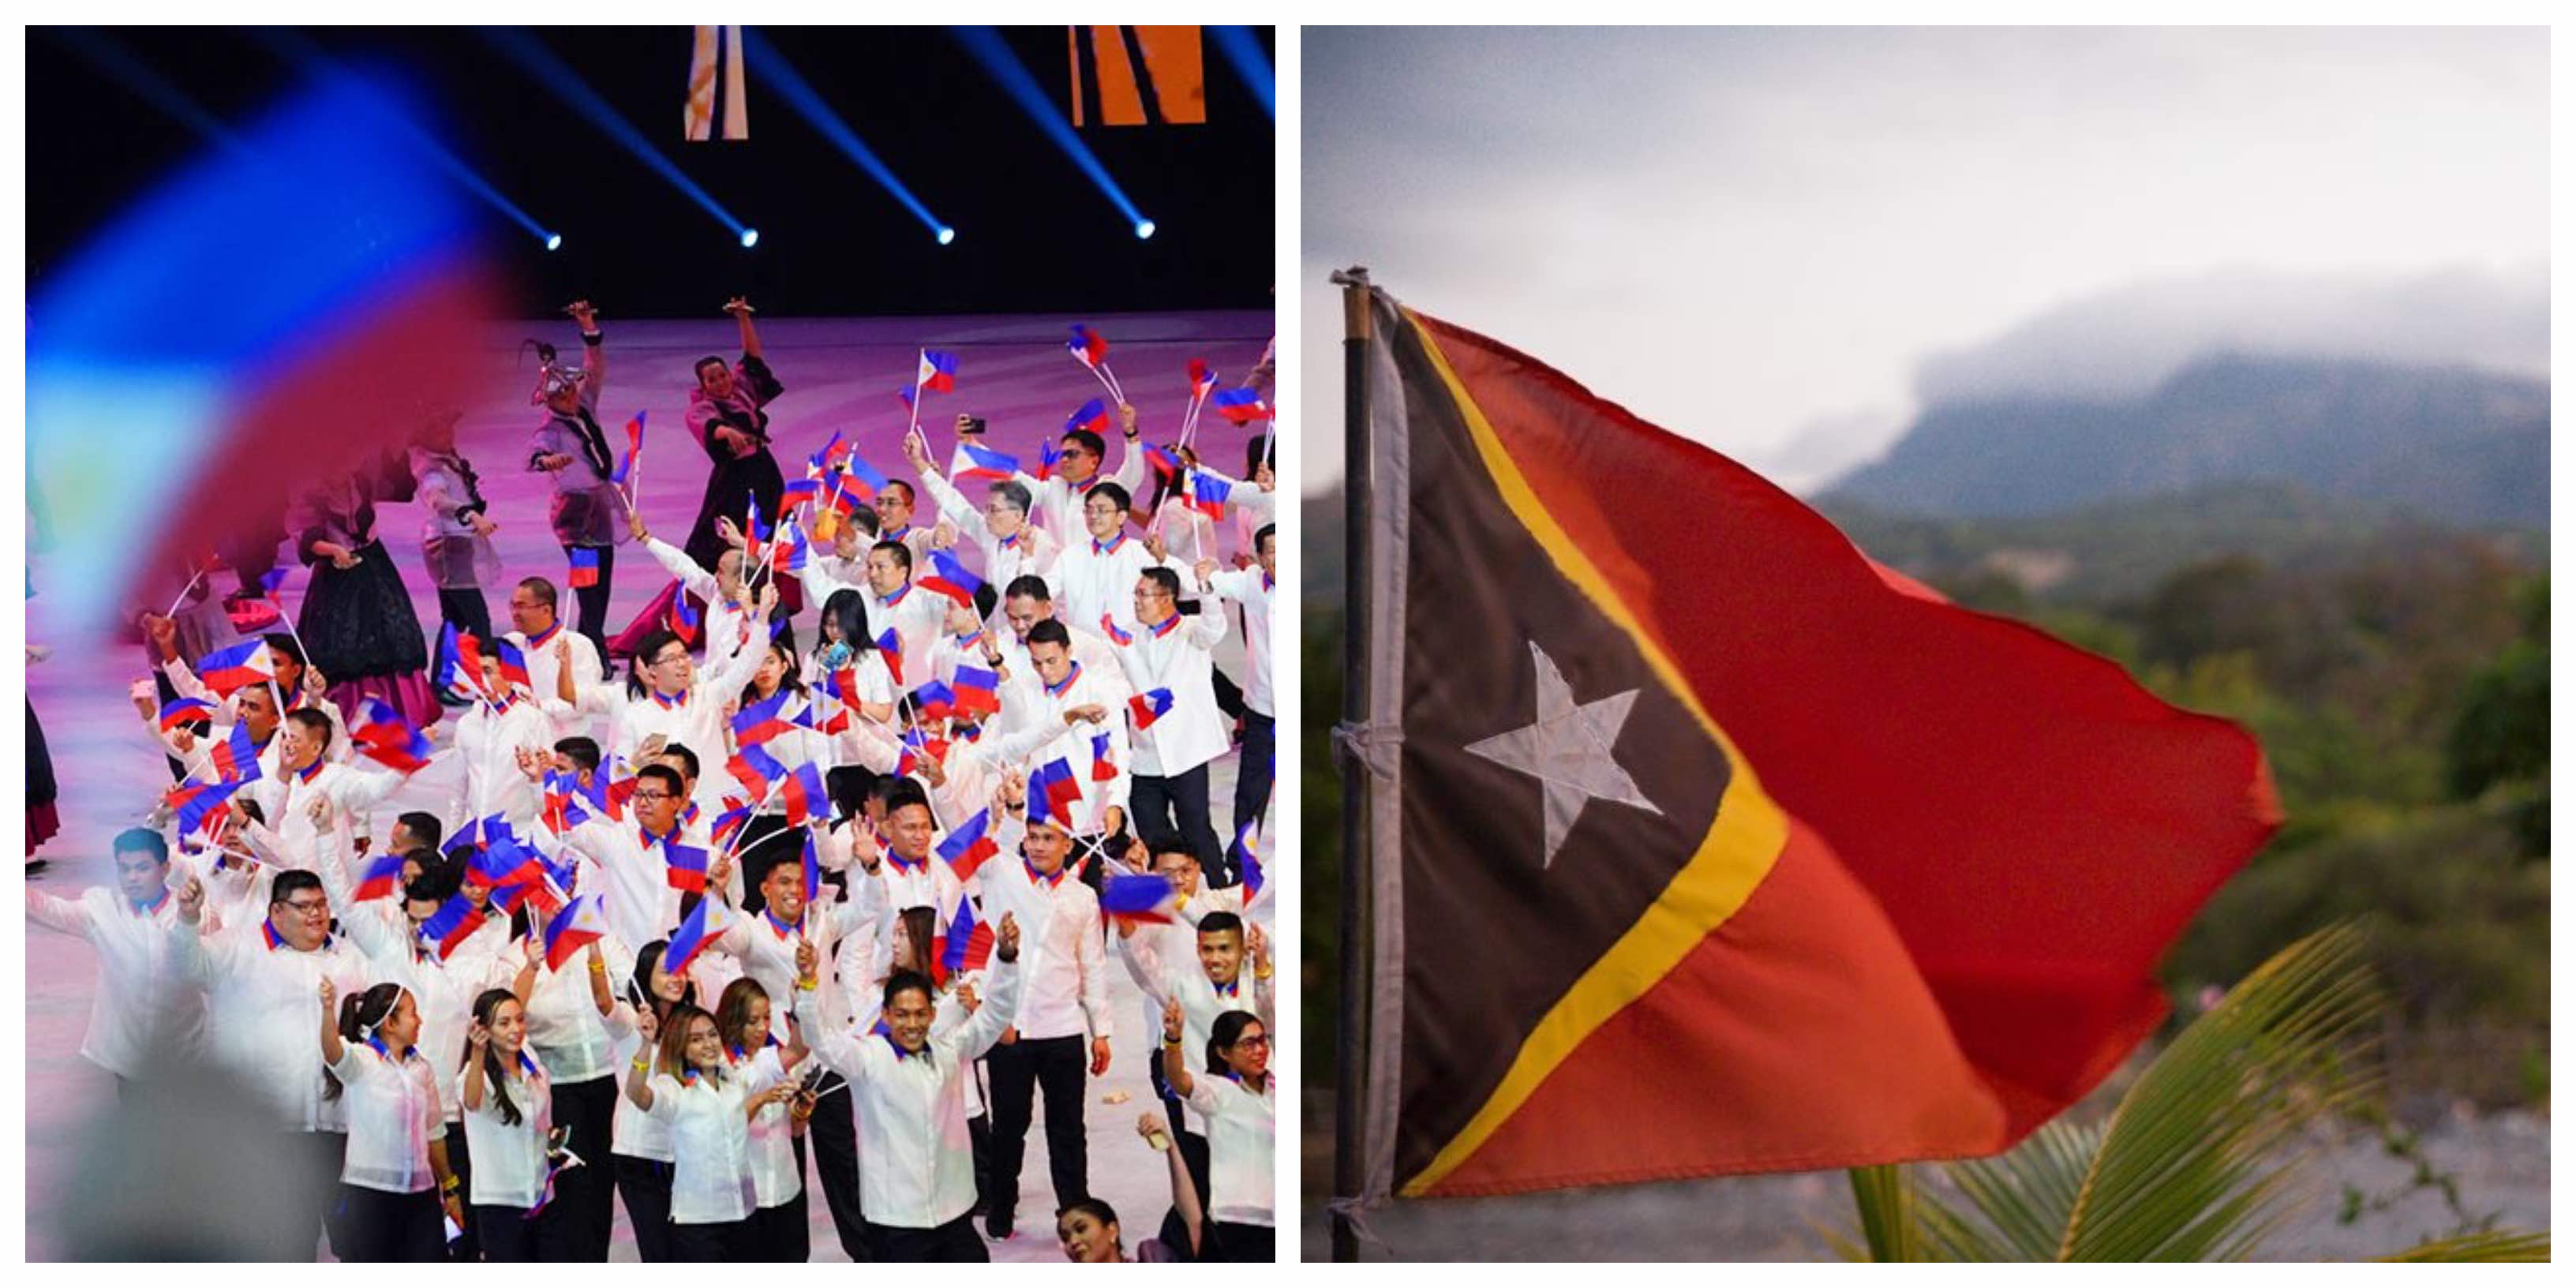 (L) At the opening ceremony of the SEA Games <I></noscript>Photo: ABS-CBN News </I> (R) Flag of Timor Leste <I>Photo: Isabel Nolasco / Wikimedia commons</I> 